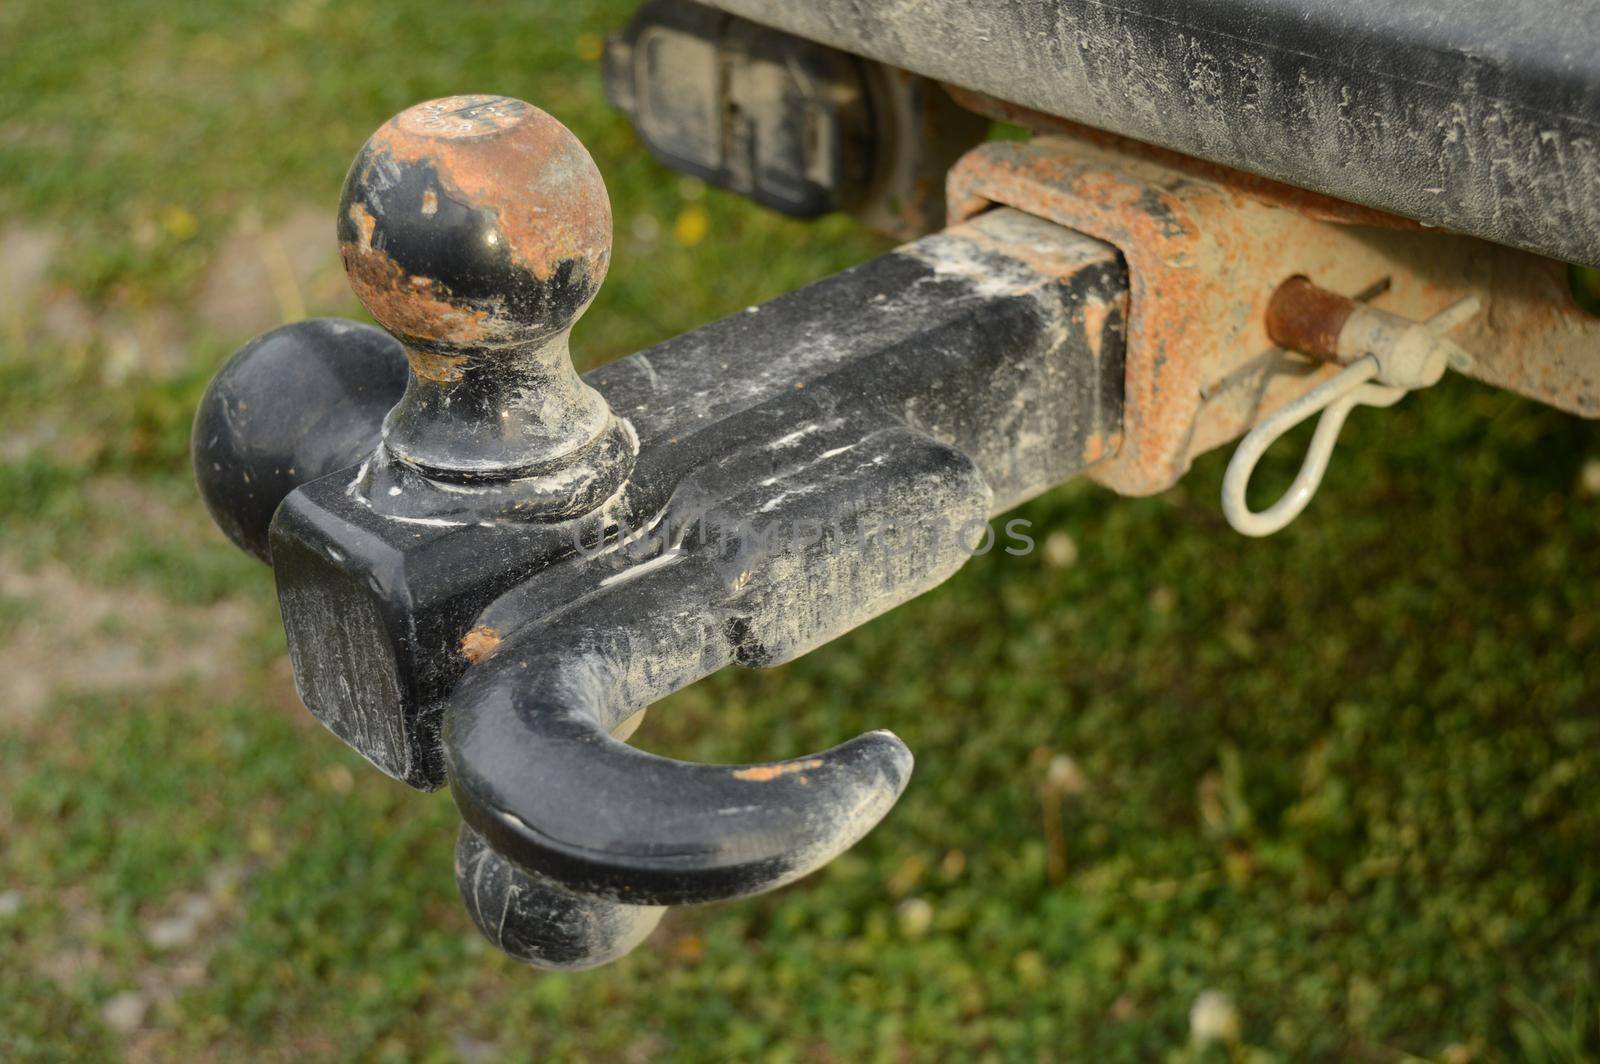 A closeup view of an attached trailer hitch on a vehicle for towing loads behind.